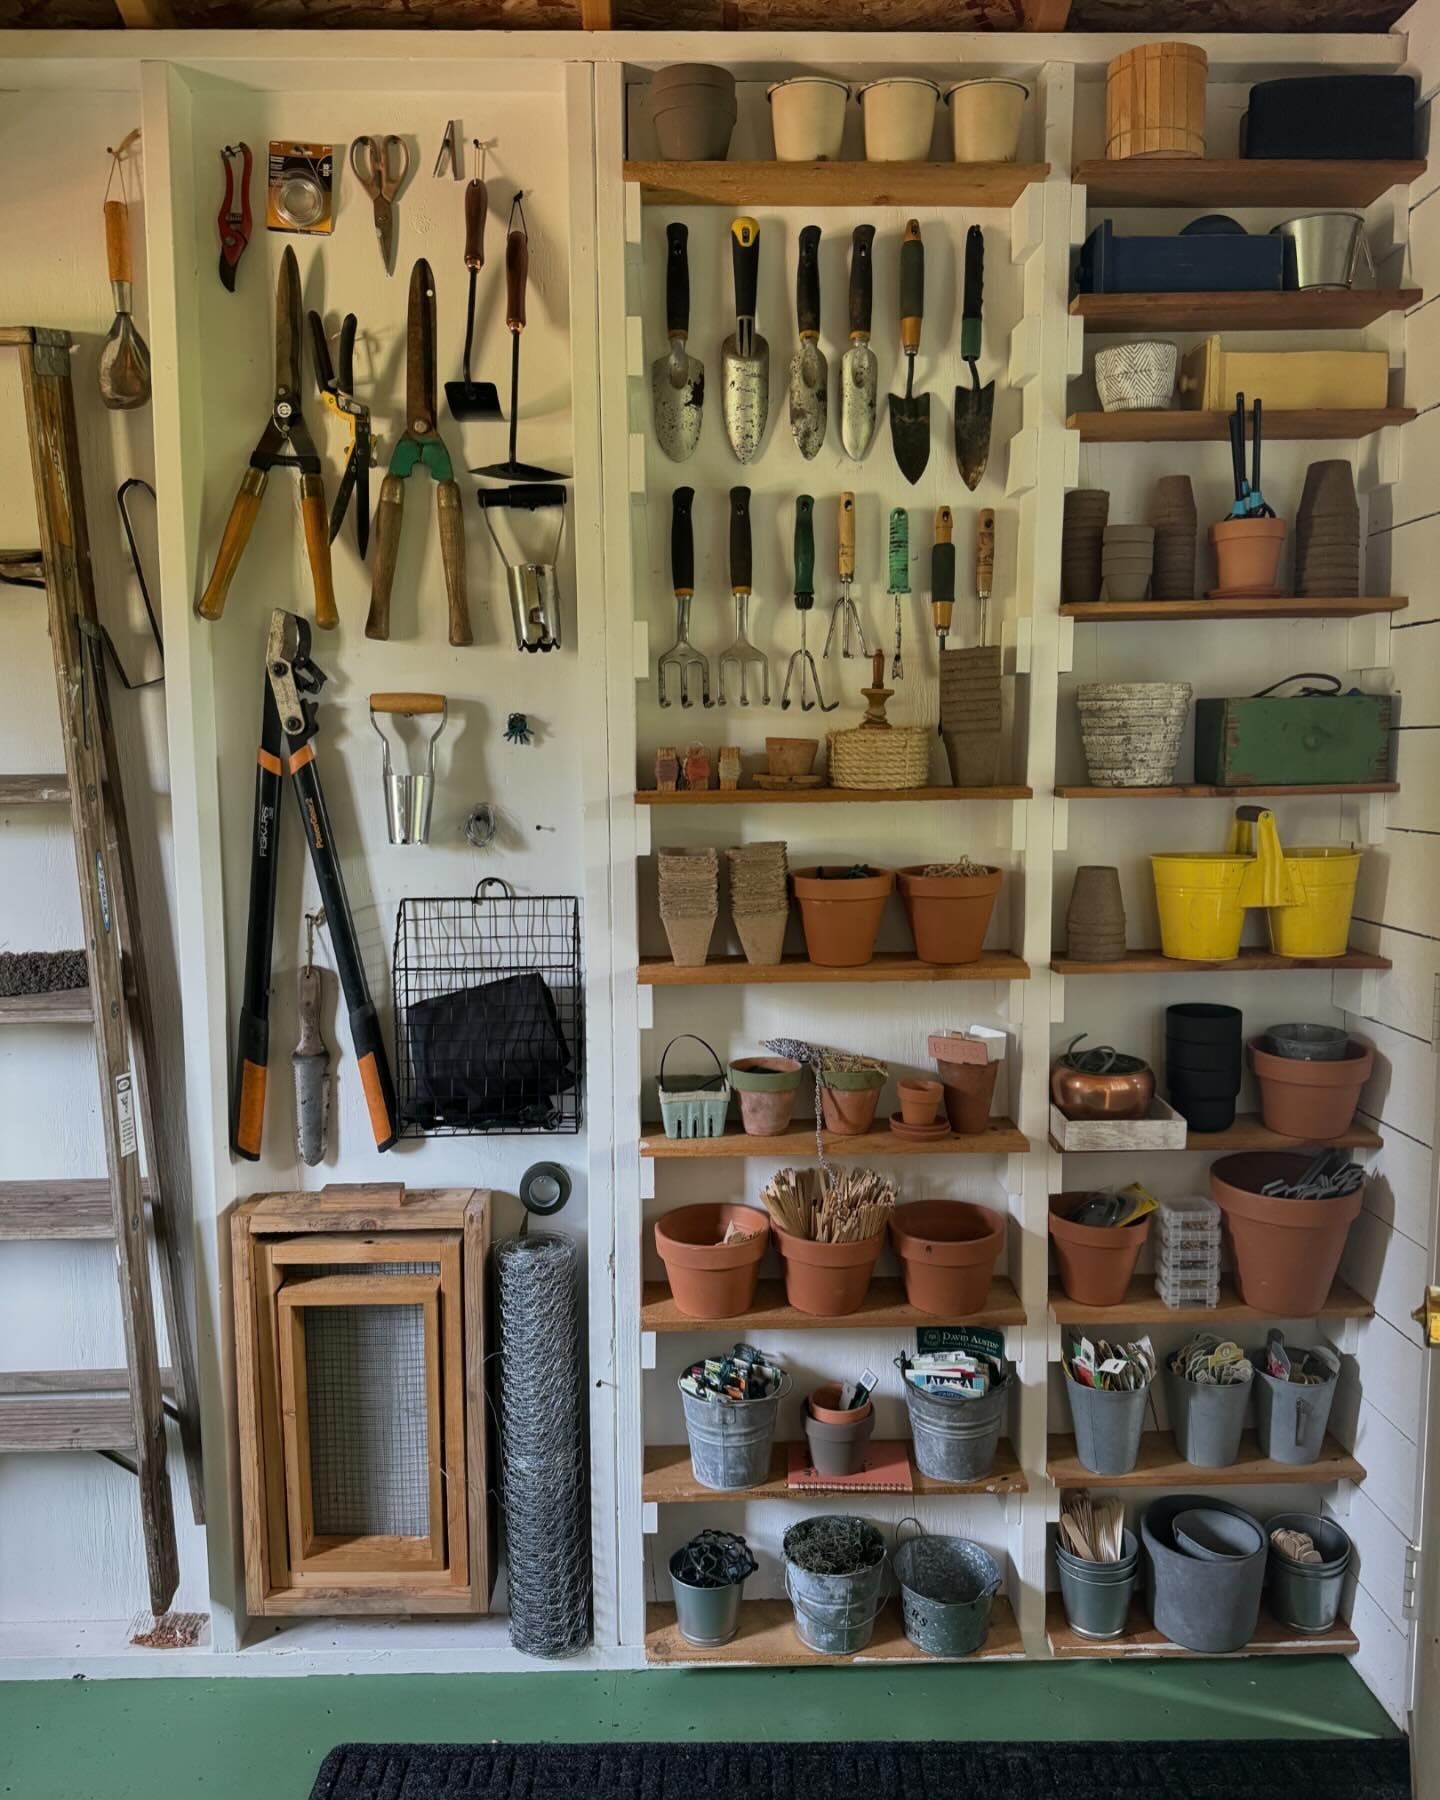 The garden shed got a little interior tidy-up today! When the vacuum comes out you know it&rsquo;s ready for some serious gardening time!